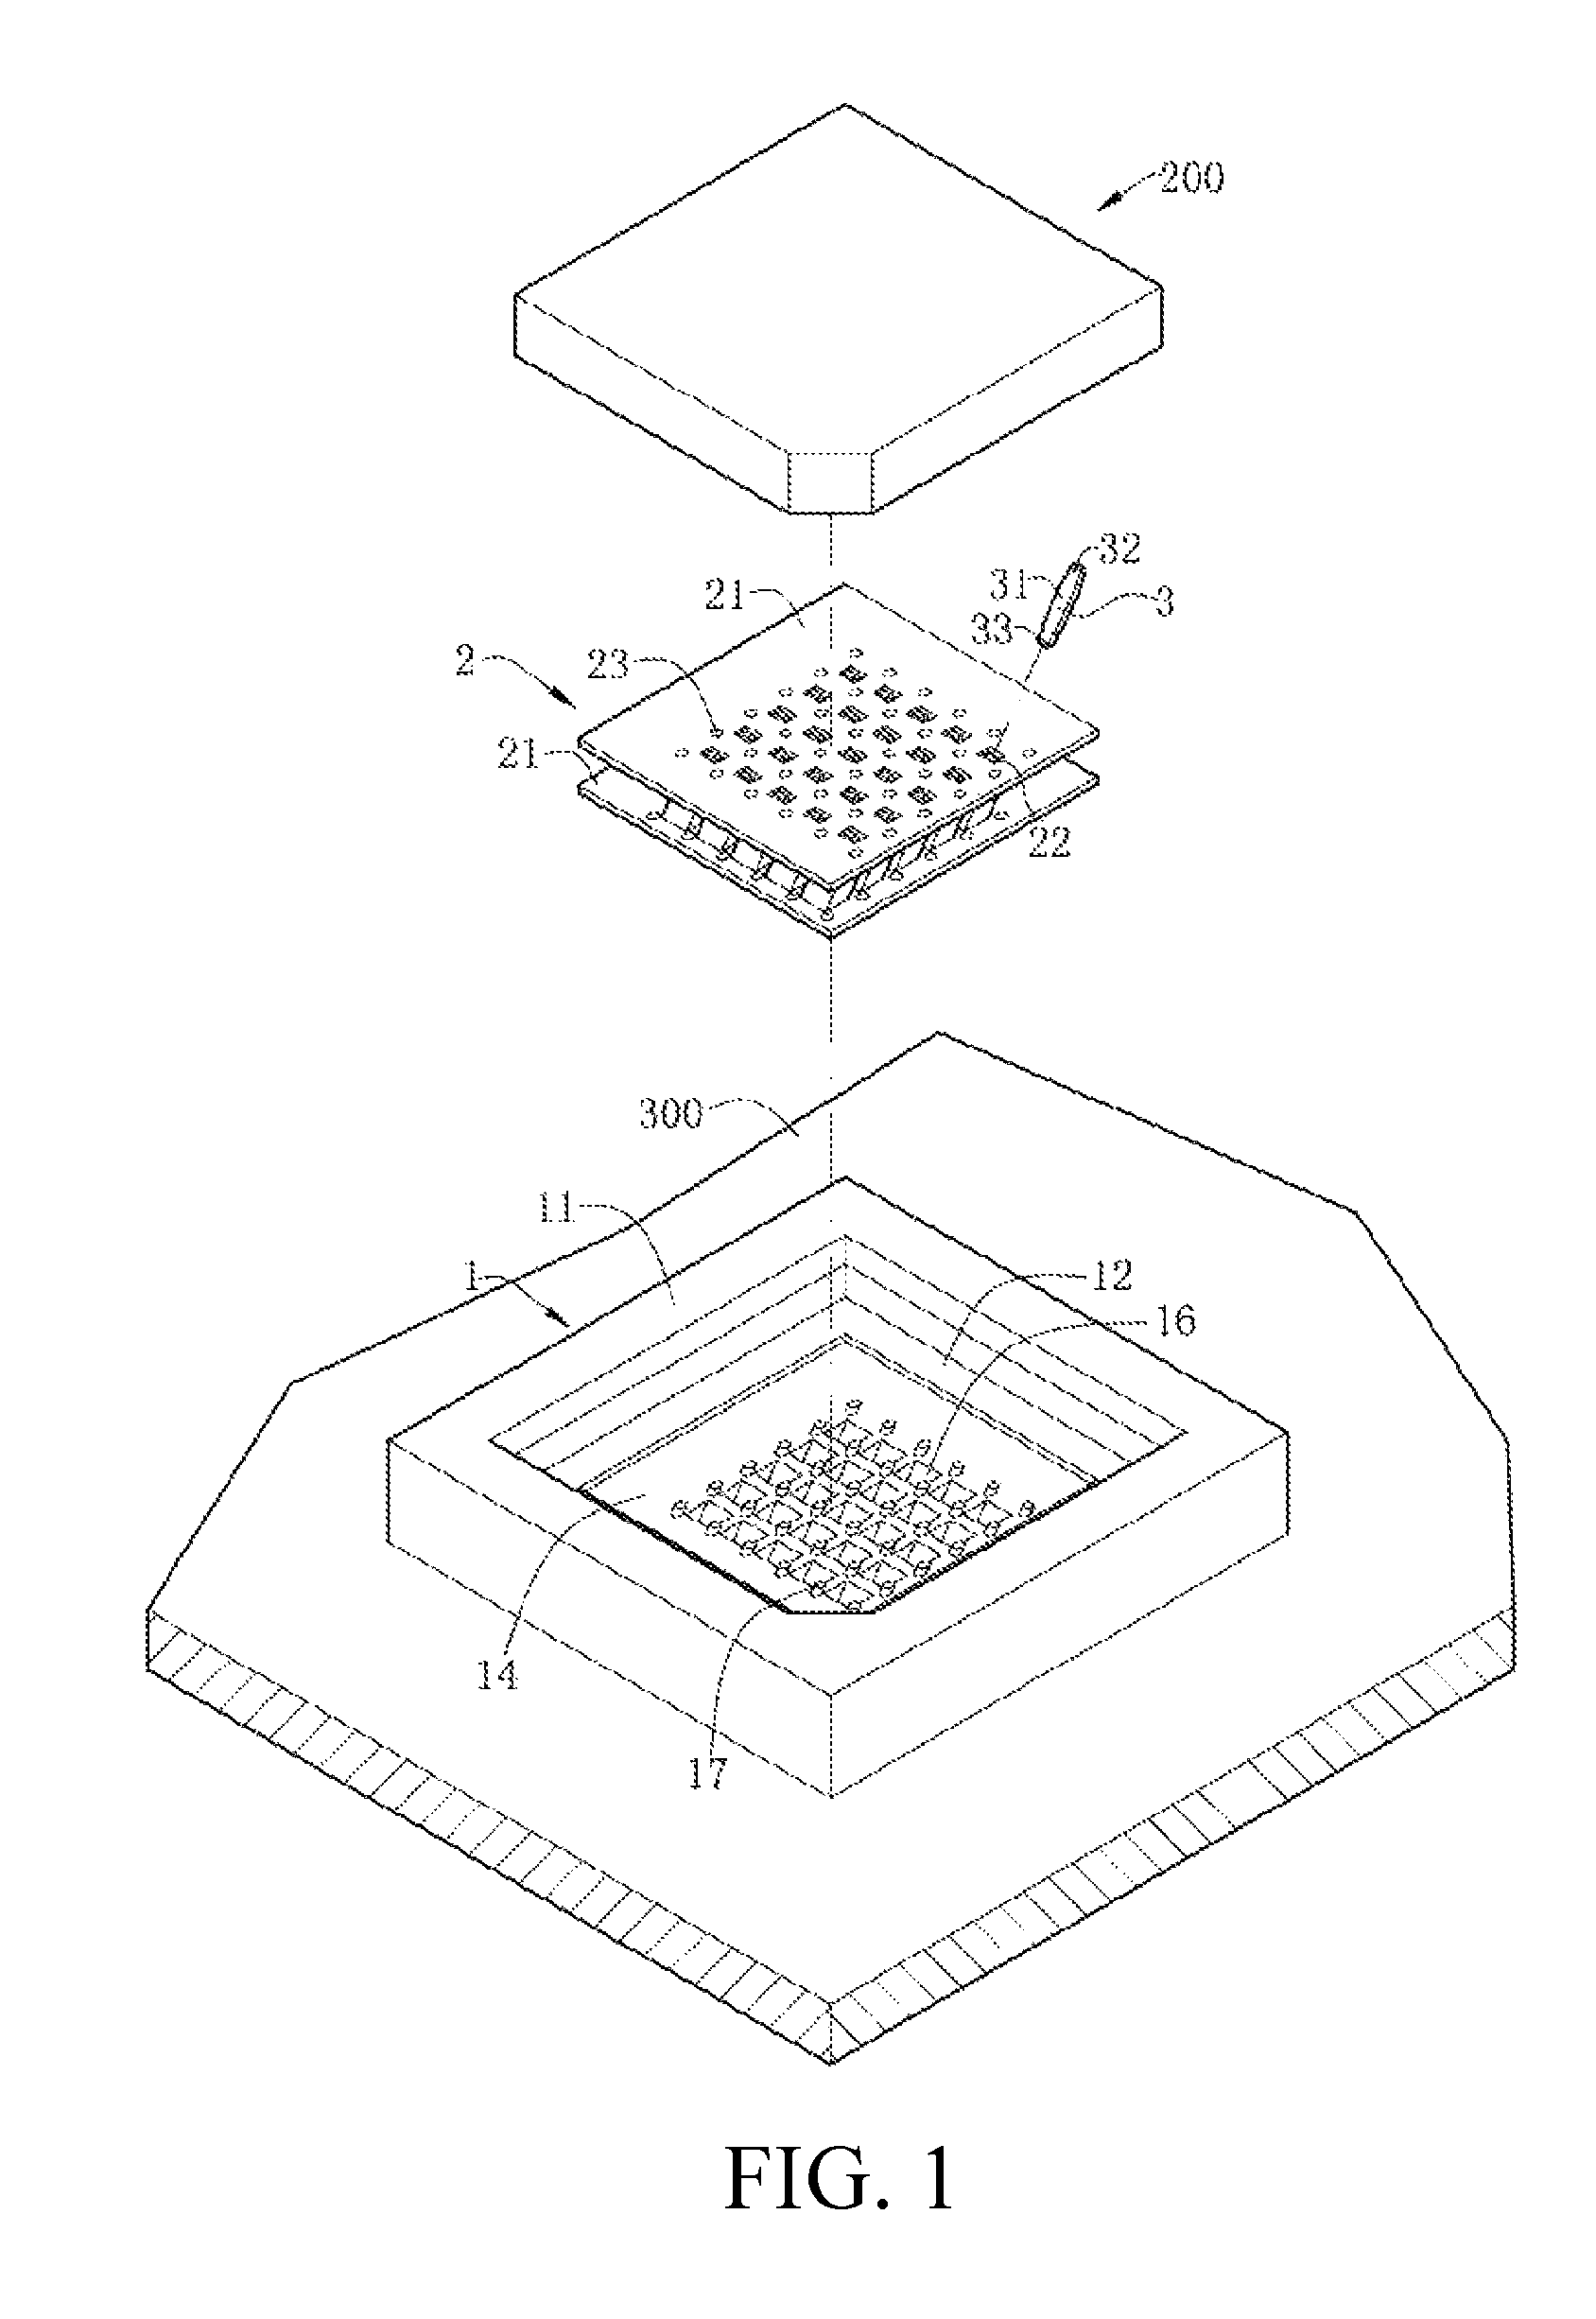 Electrical connector with a plurality of contacts recived in a plurality of slots in a plurality of elastic bodies integrally formed with an insulating body